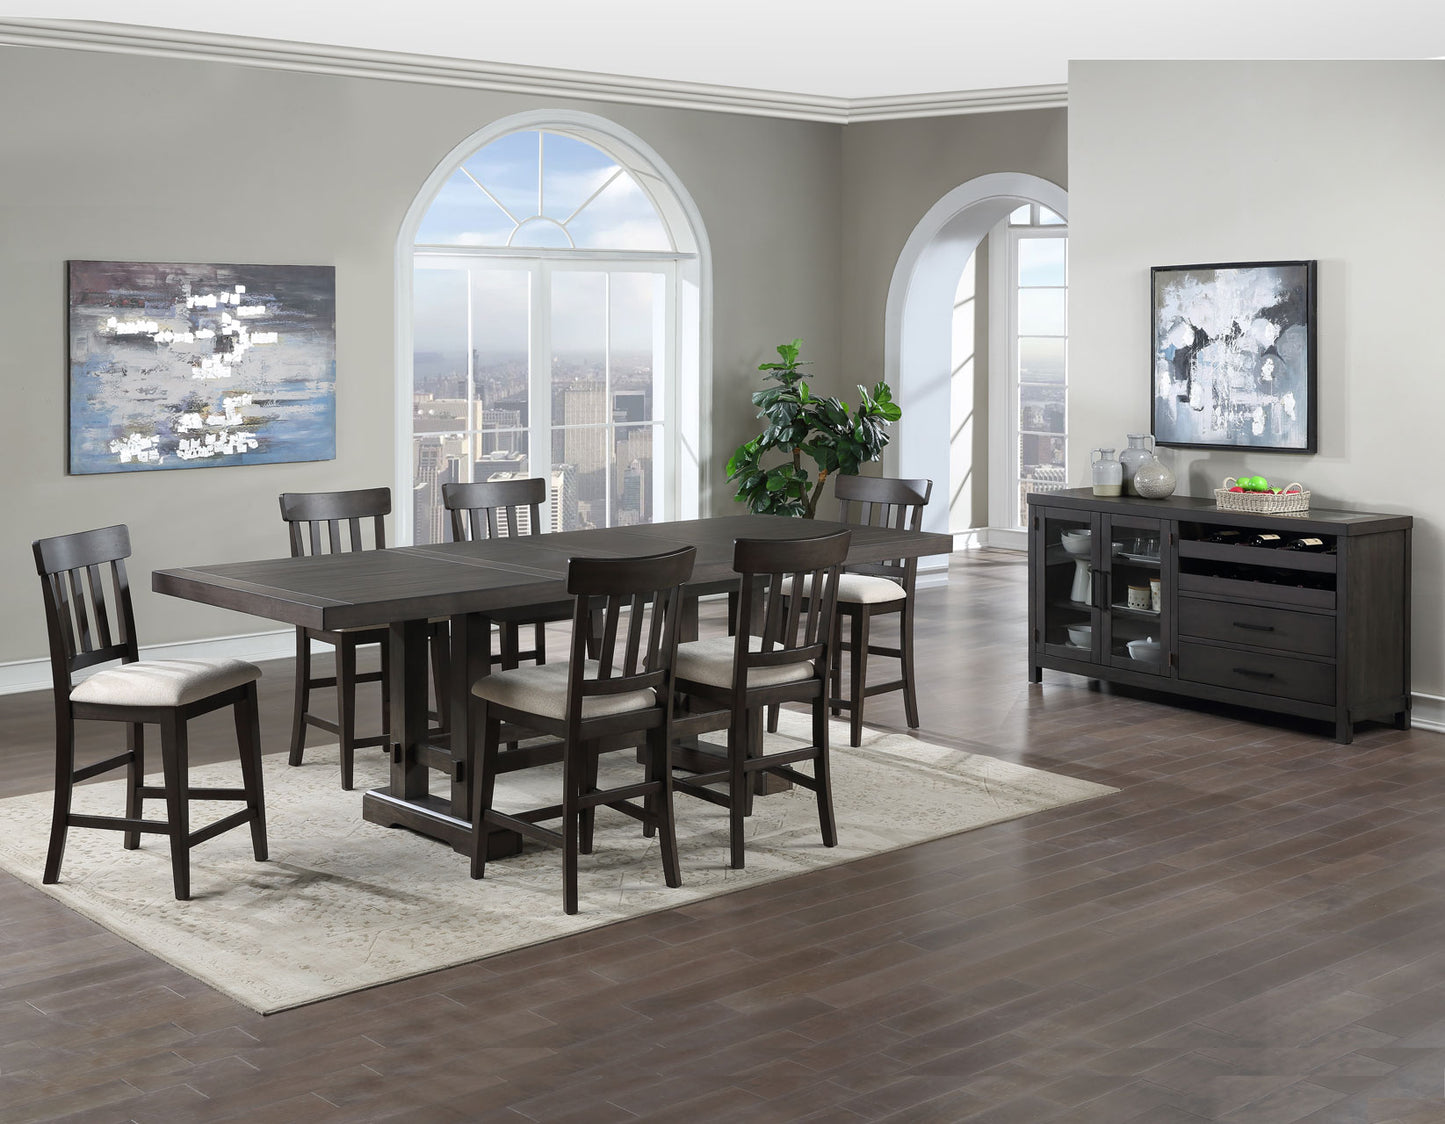 Napa 5-Piece Counter Dining Set
(Counter Table & 4 Counter Chairs)